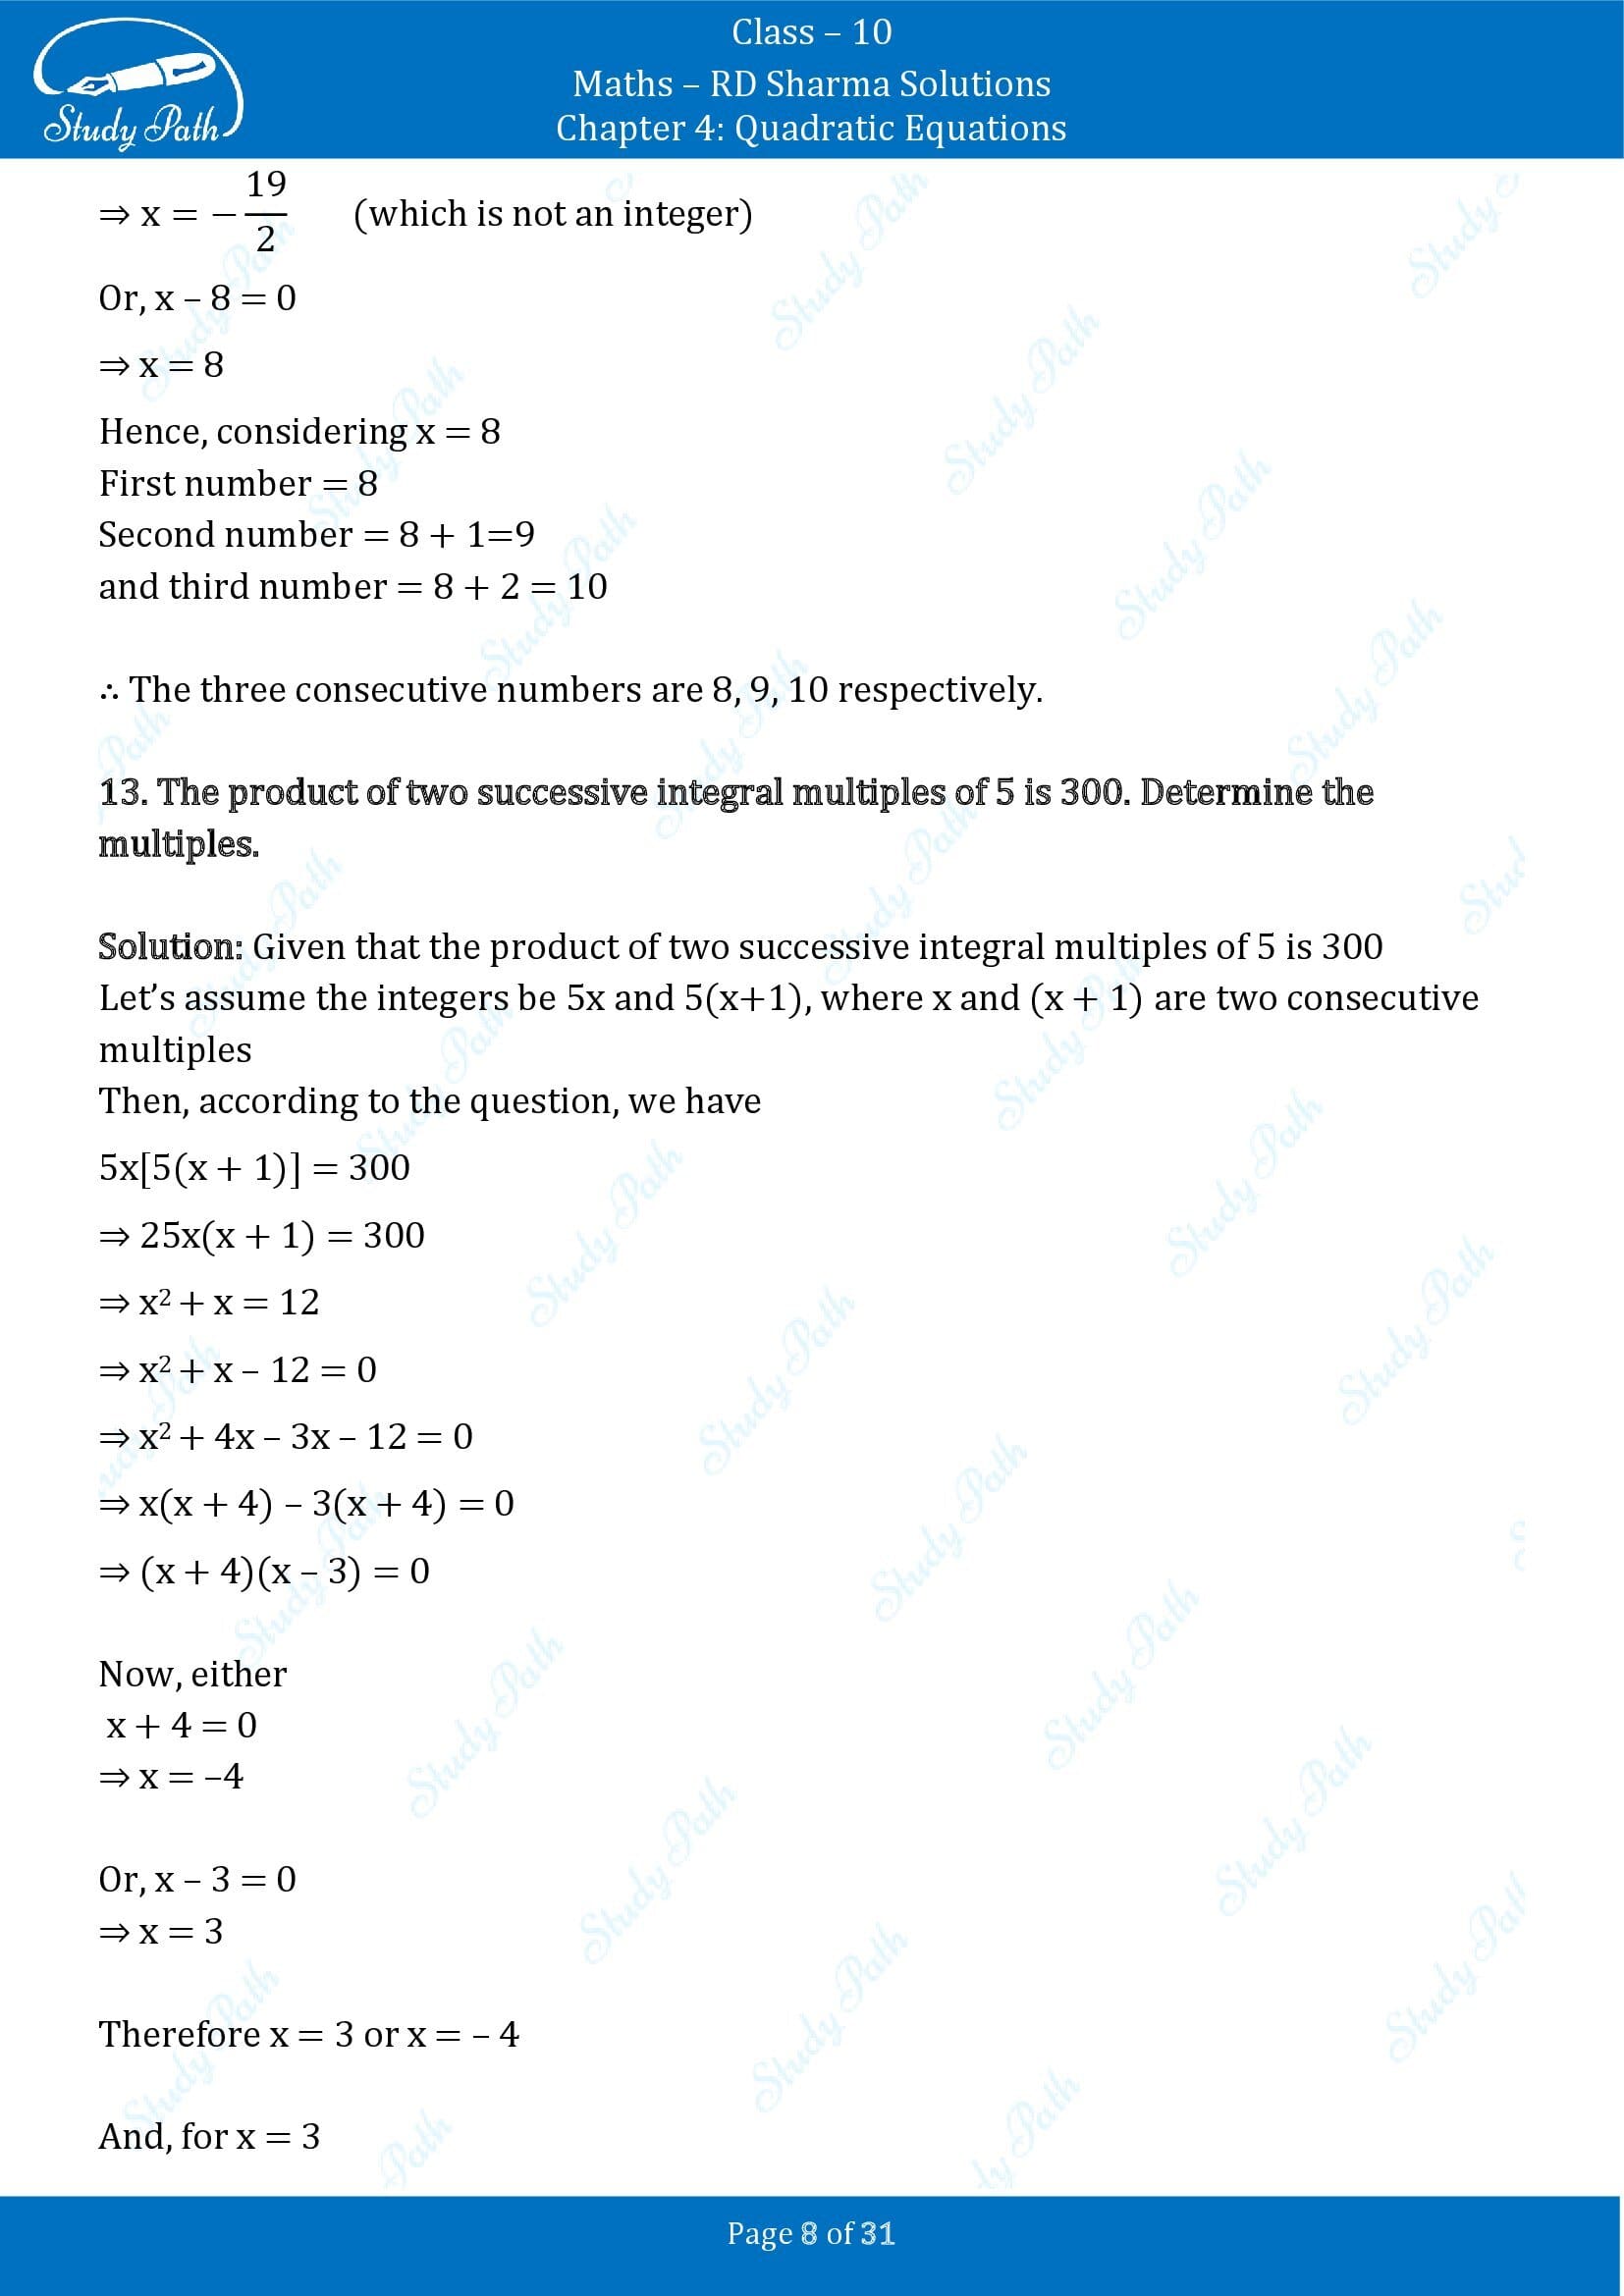 RD Sharma Solutions Class 10 Chapter 4 Quadratic Equations Exercise 4.7 00008